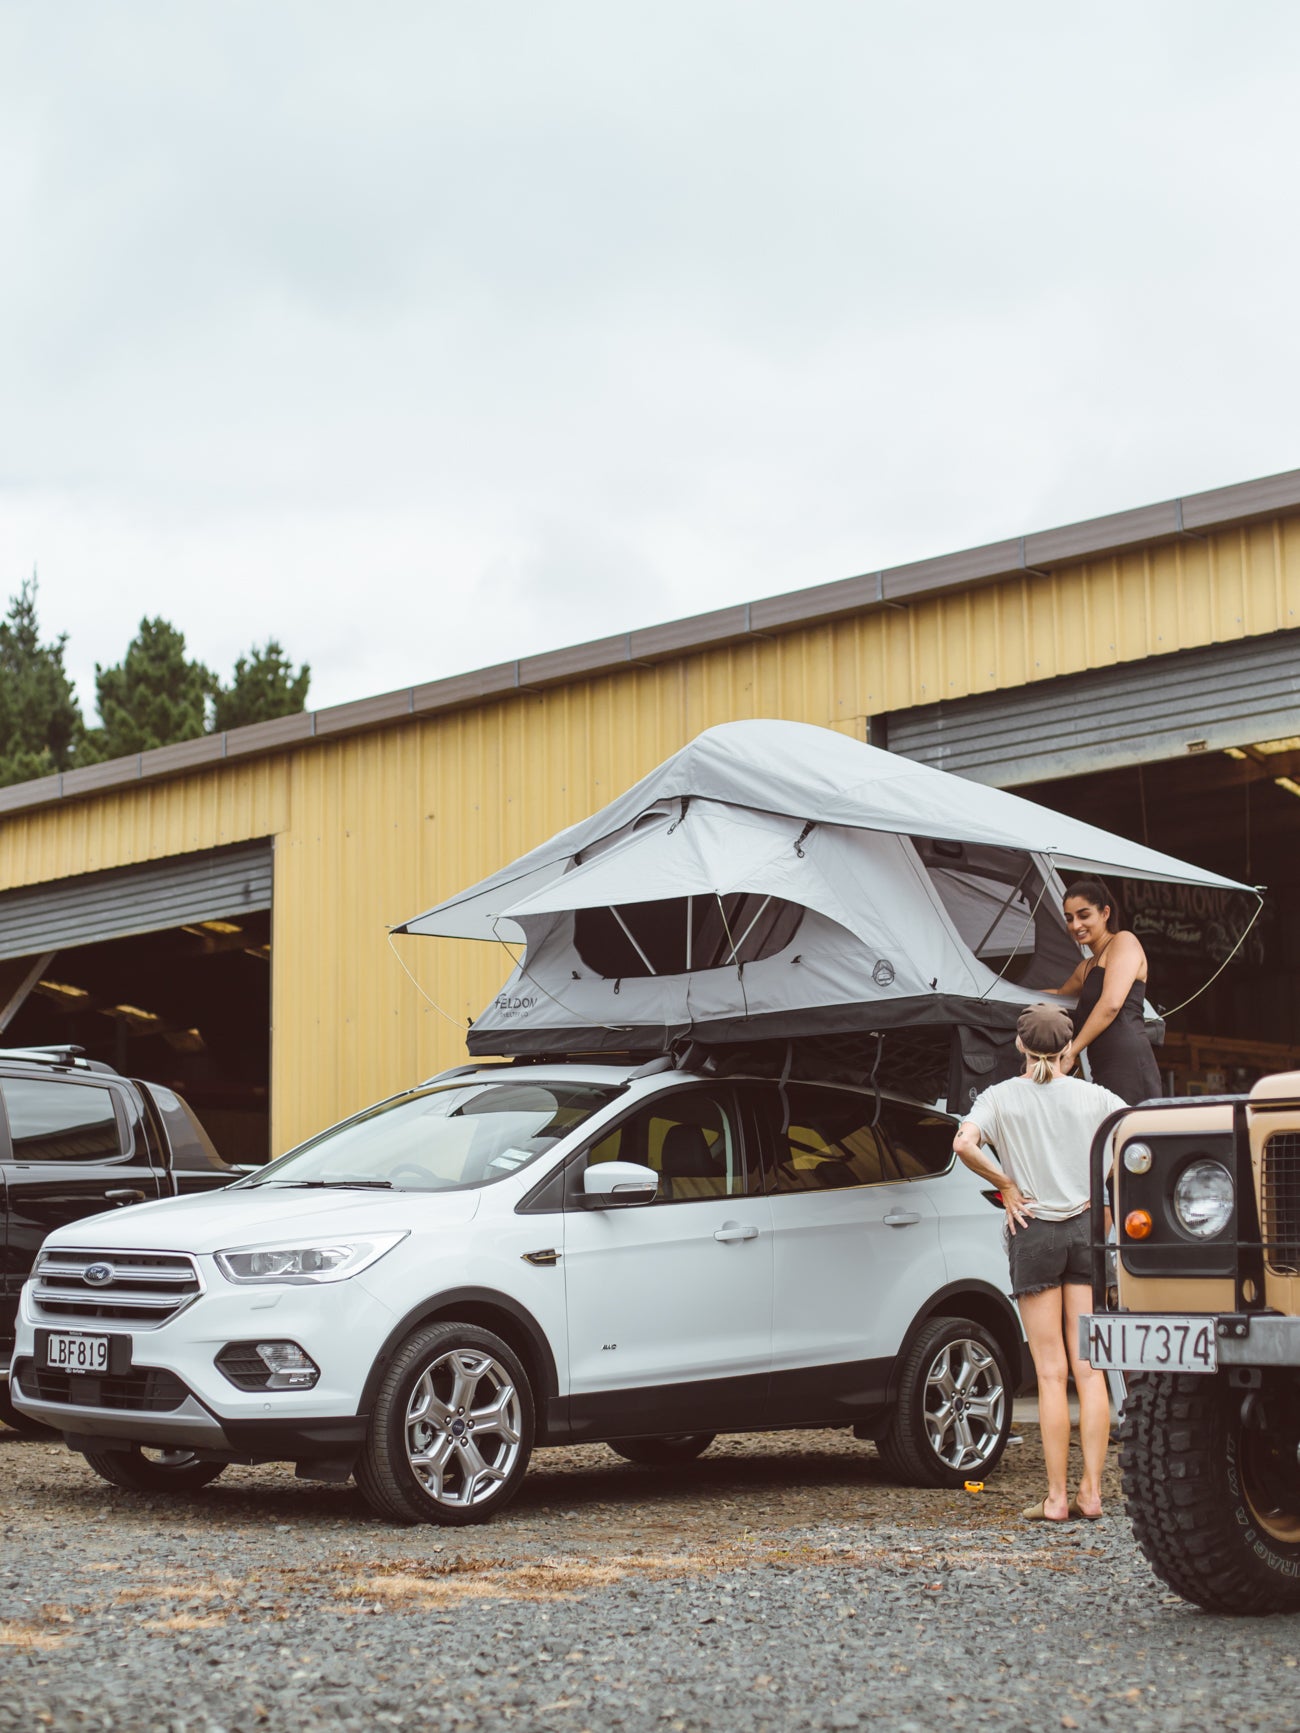 Feldon-shelter-ford-escape-rooftop-tent